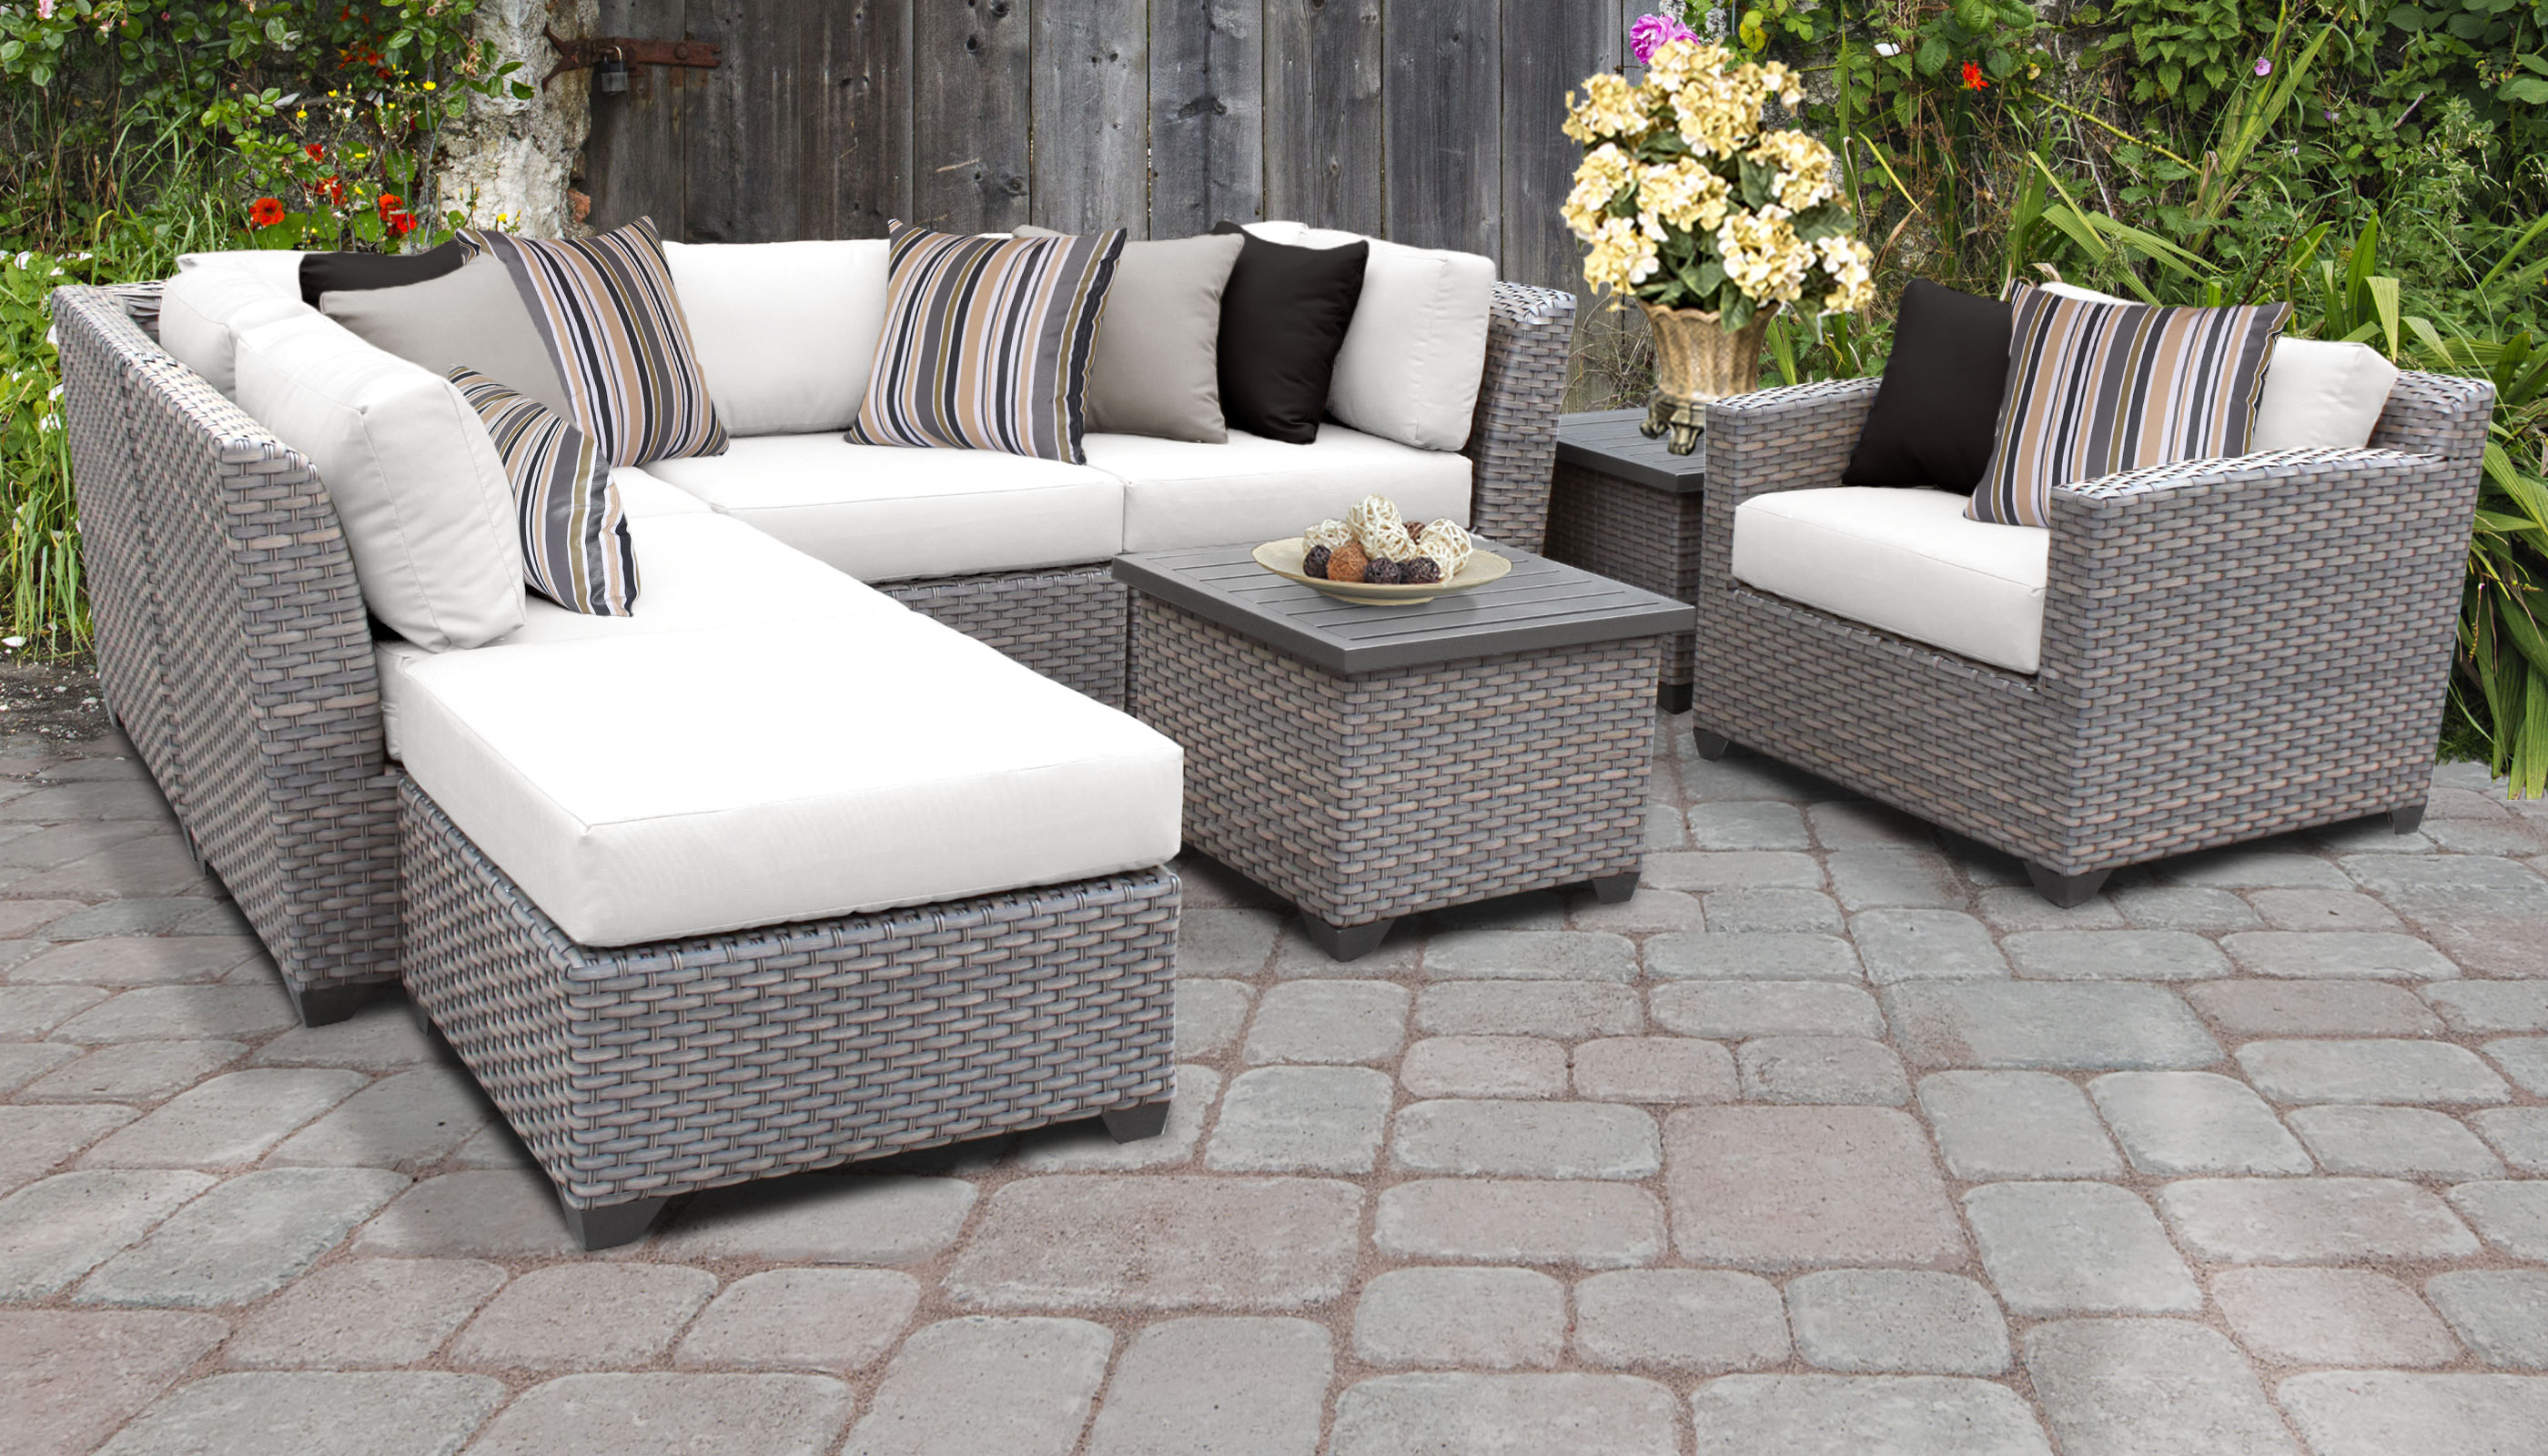 TK Classics Florence Wicker 8 Piece Patio Conversation Set with End Table and 2 Sets of Cushion Covers - image 1 of 12